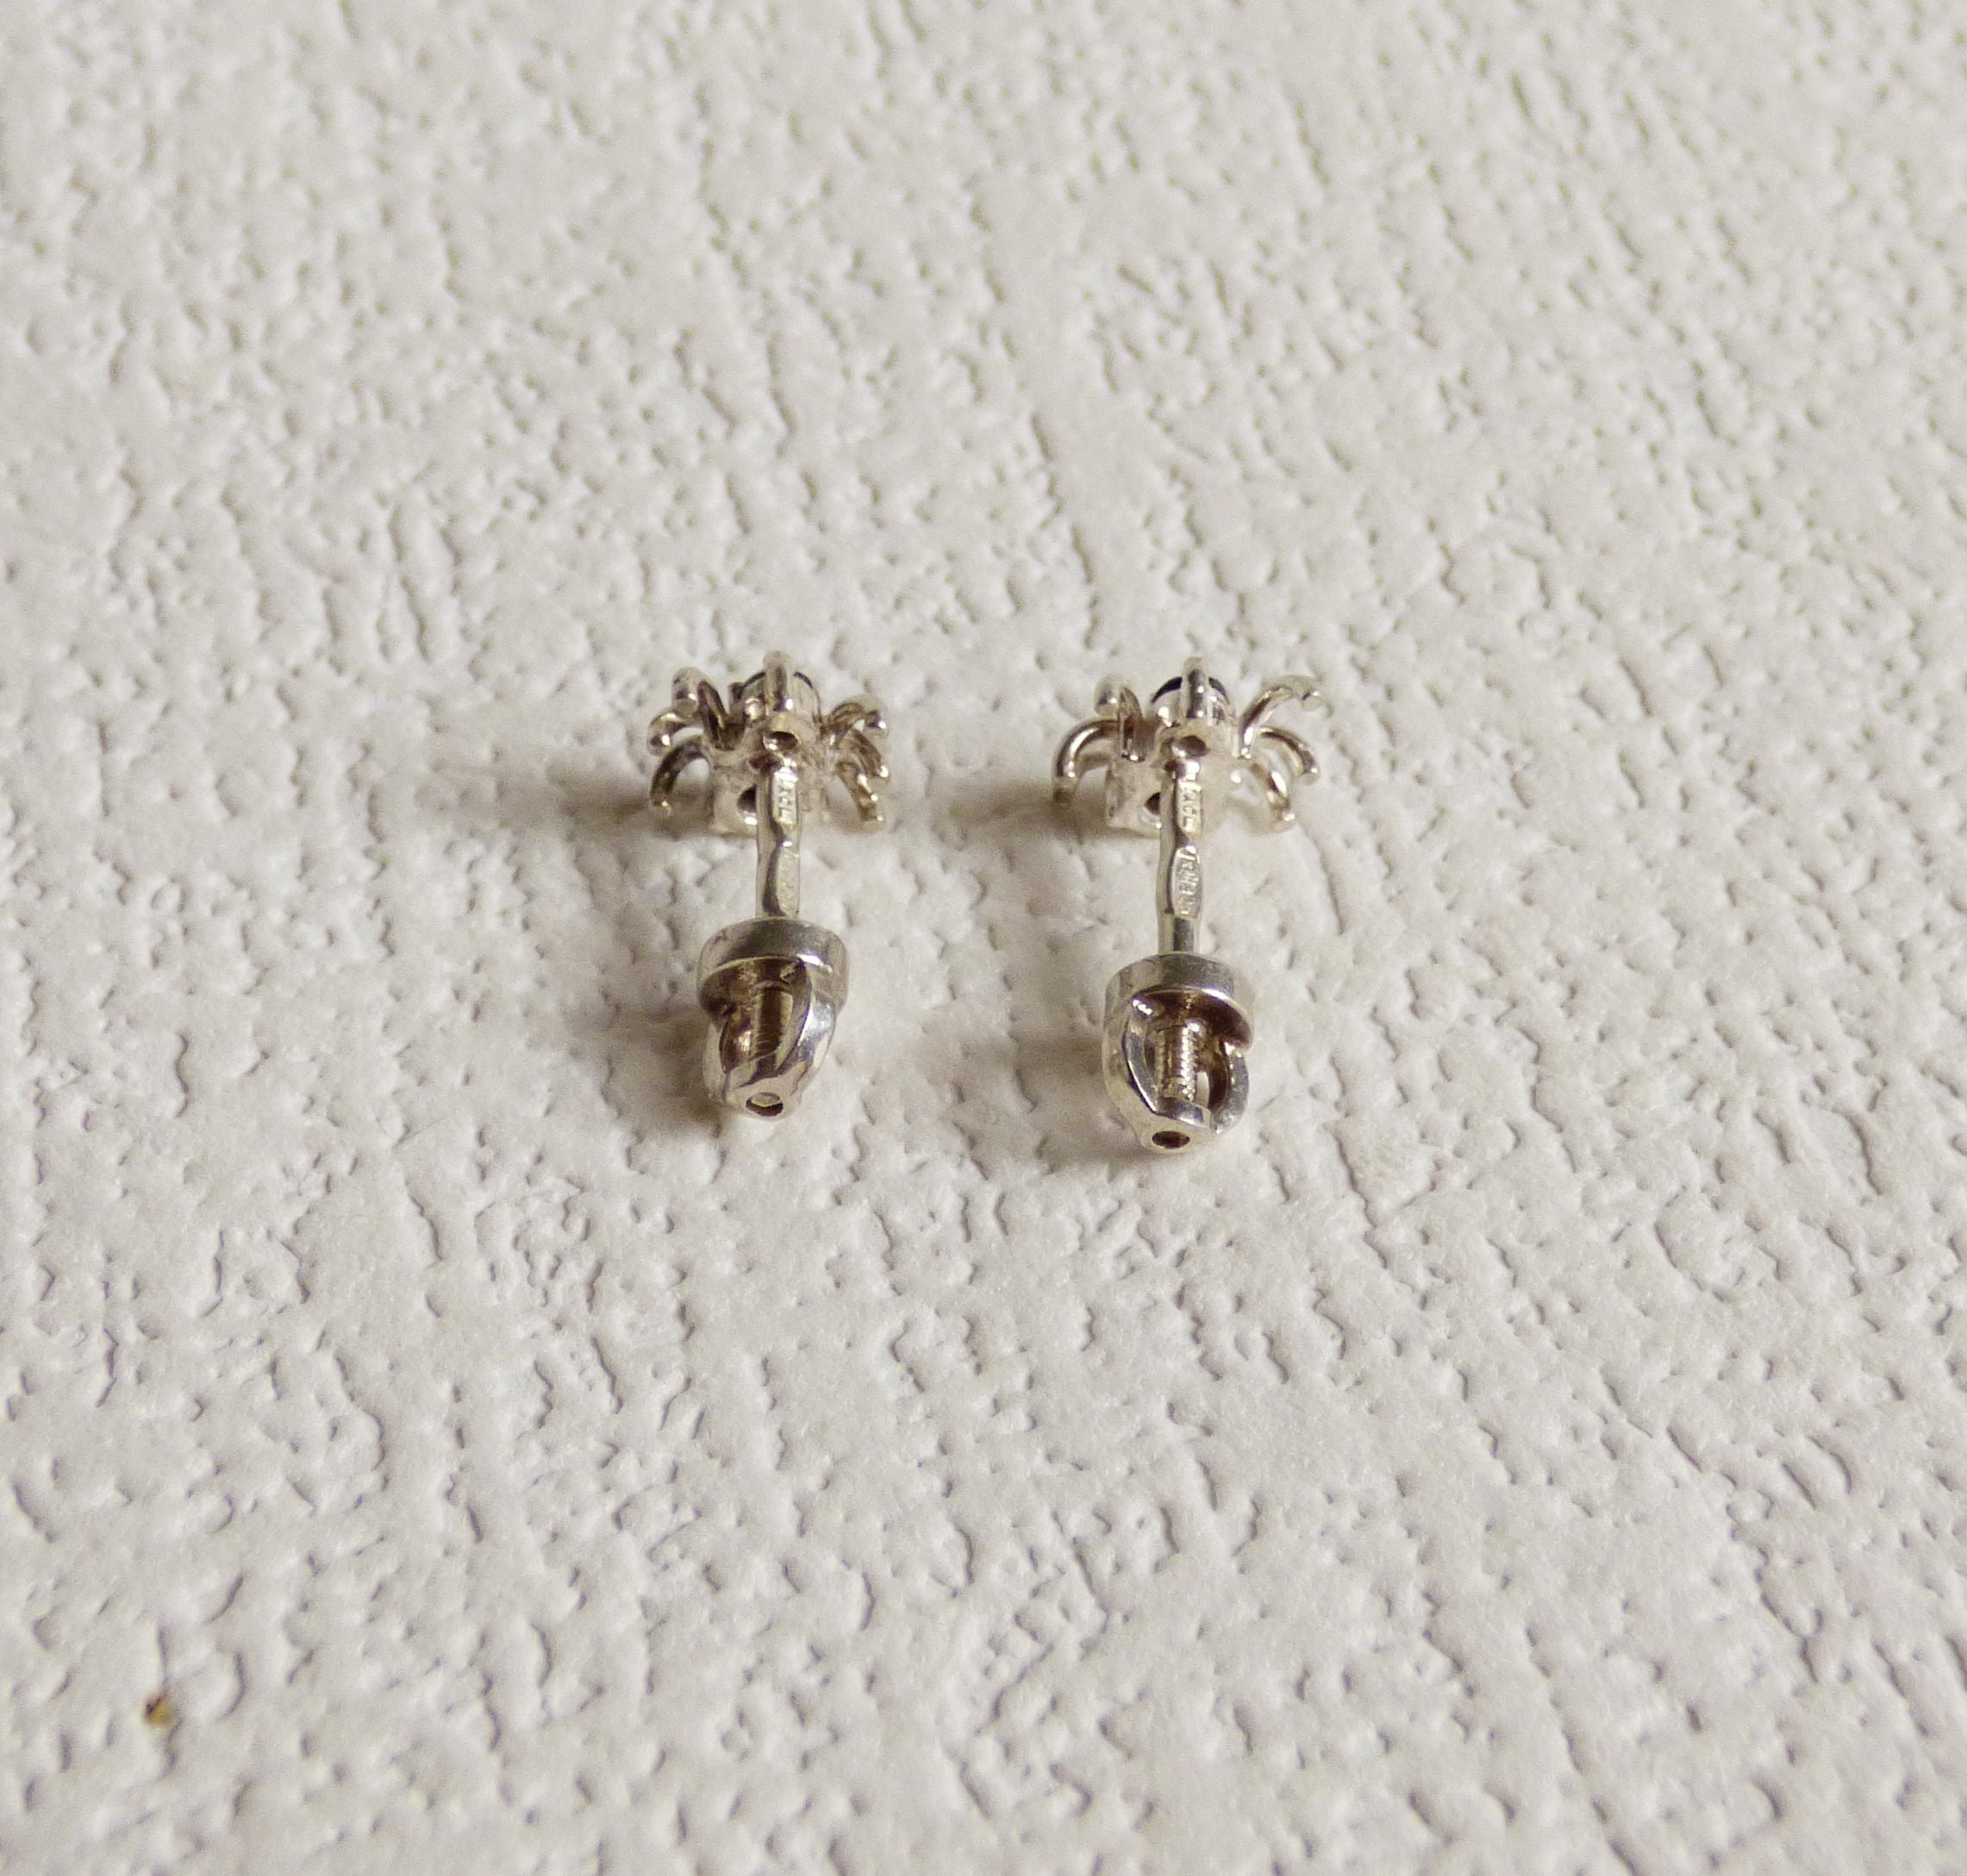 Vintage Tiny Sterling Silver Stud Earrings Spiders With Black - Etsy